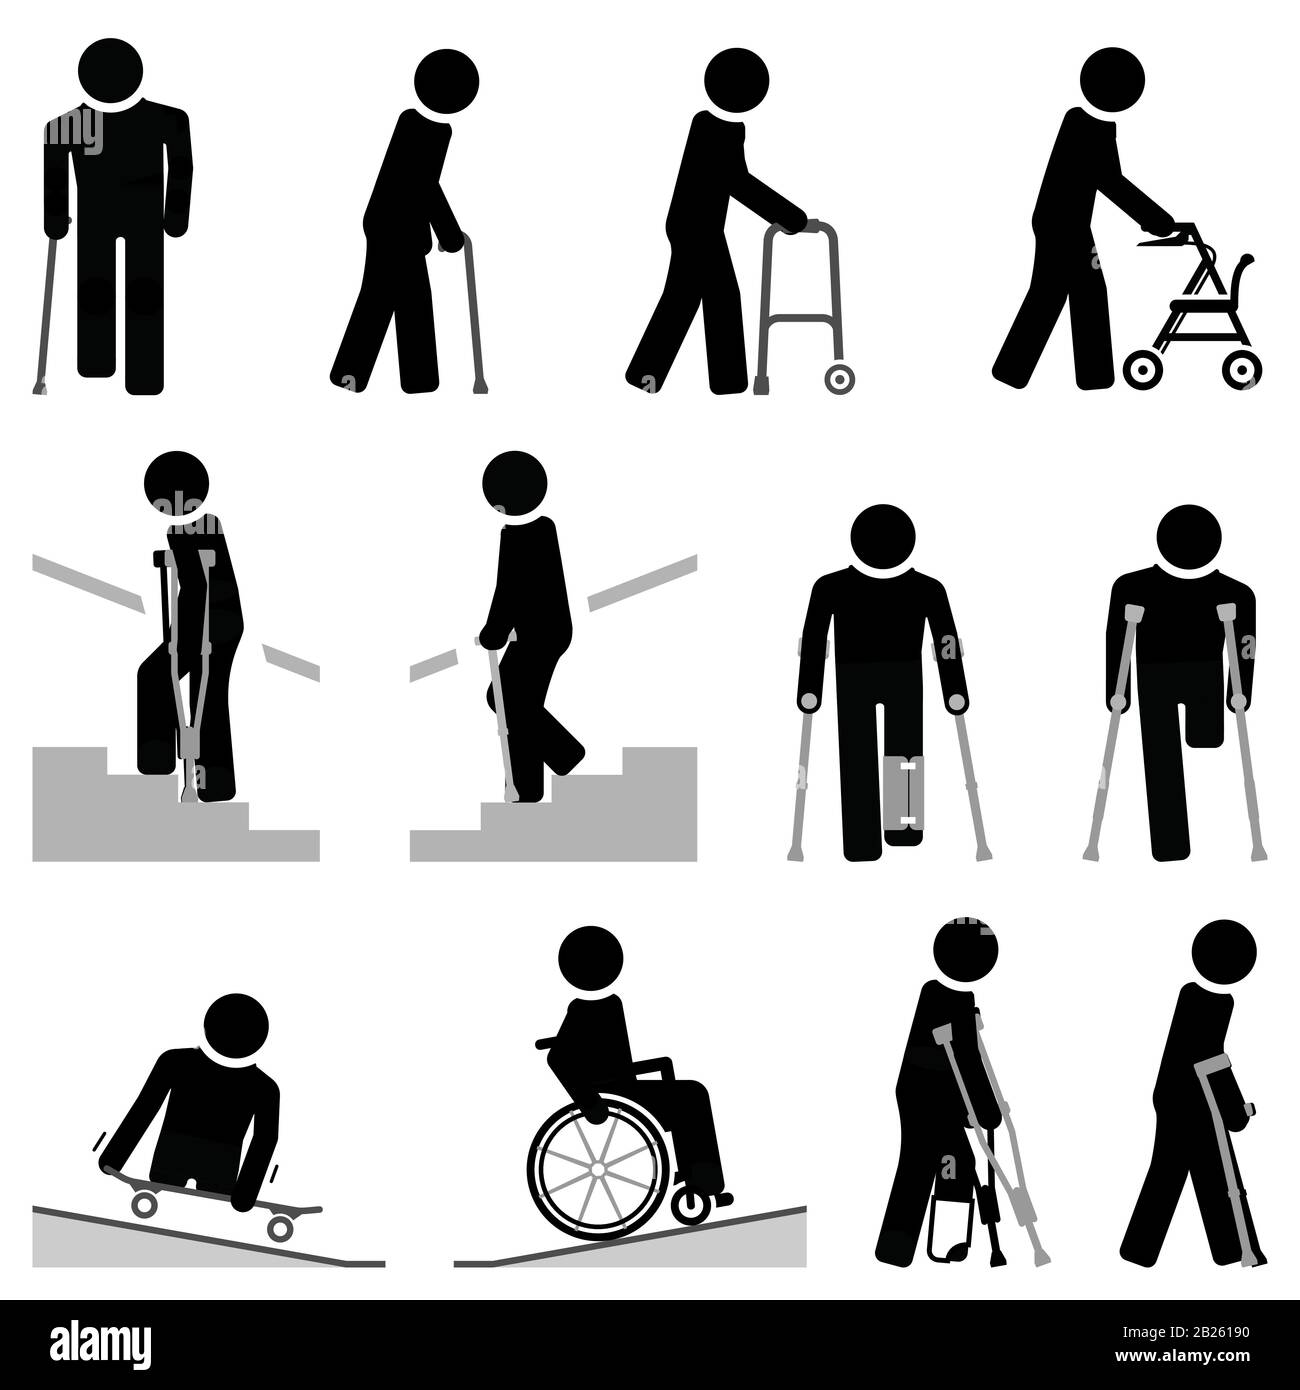 Walking aids can help people with impaired ability to move. Stock Vector